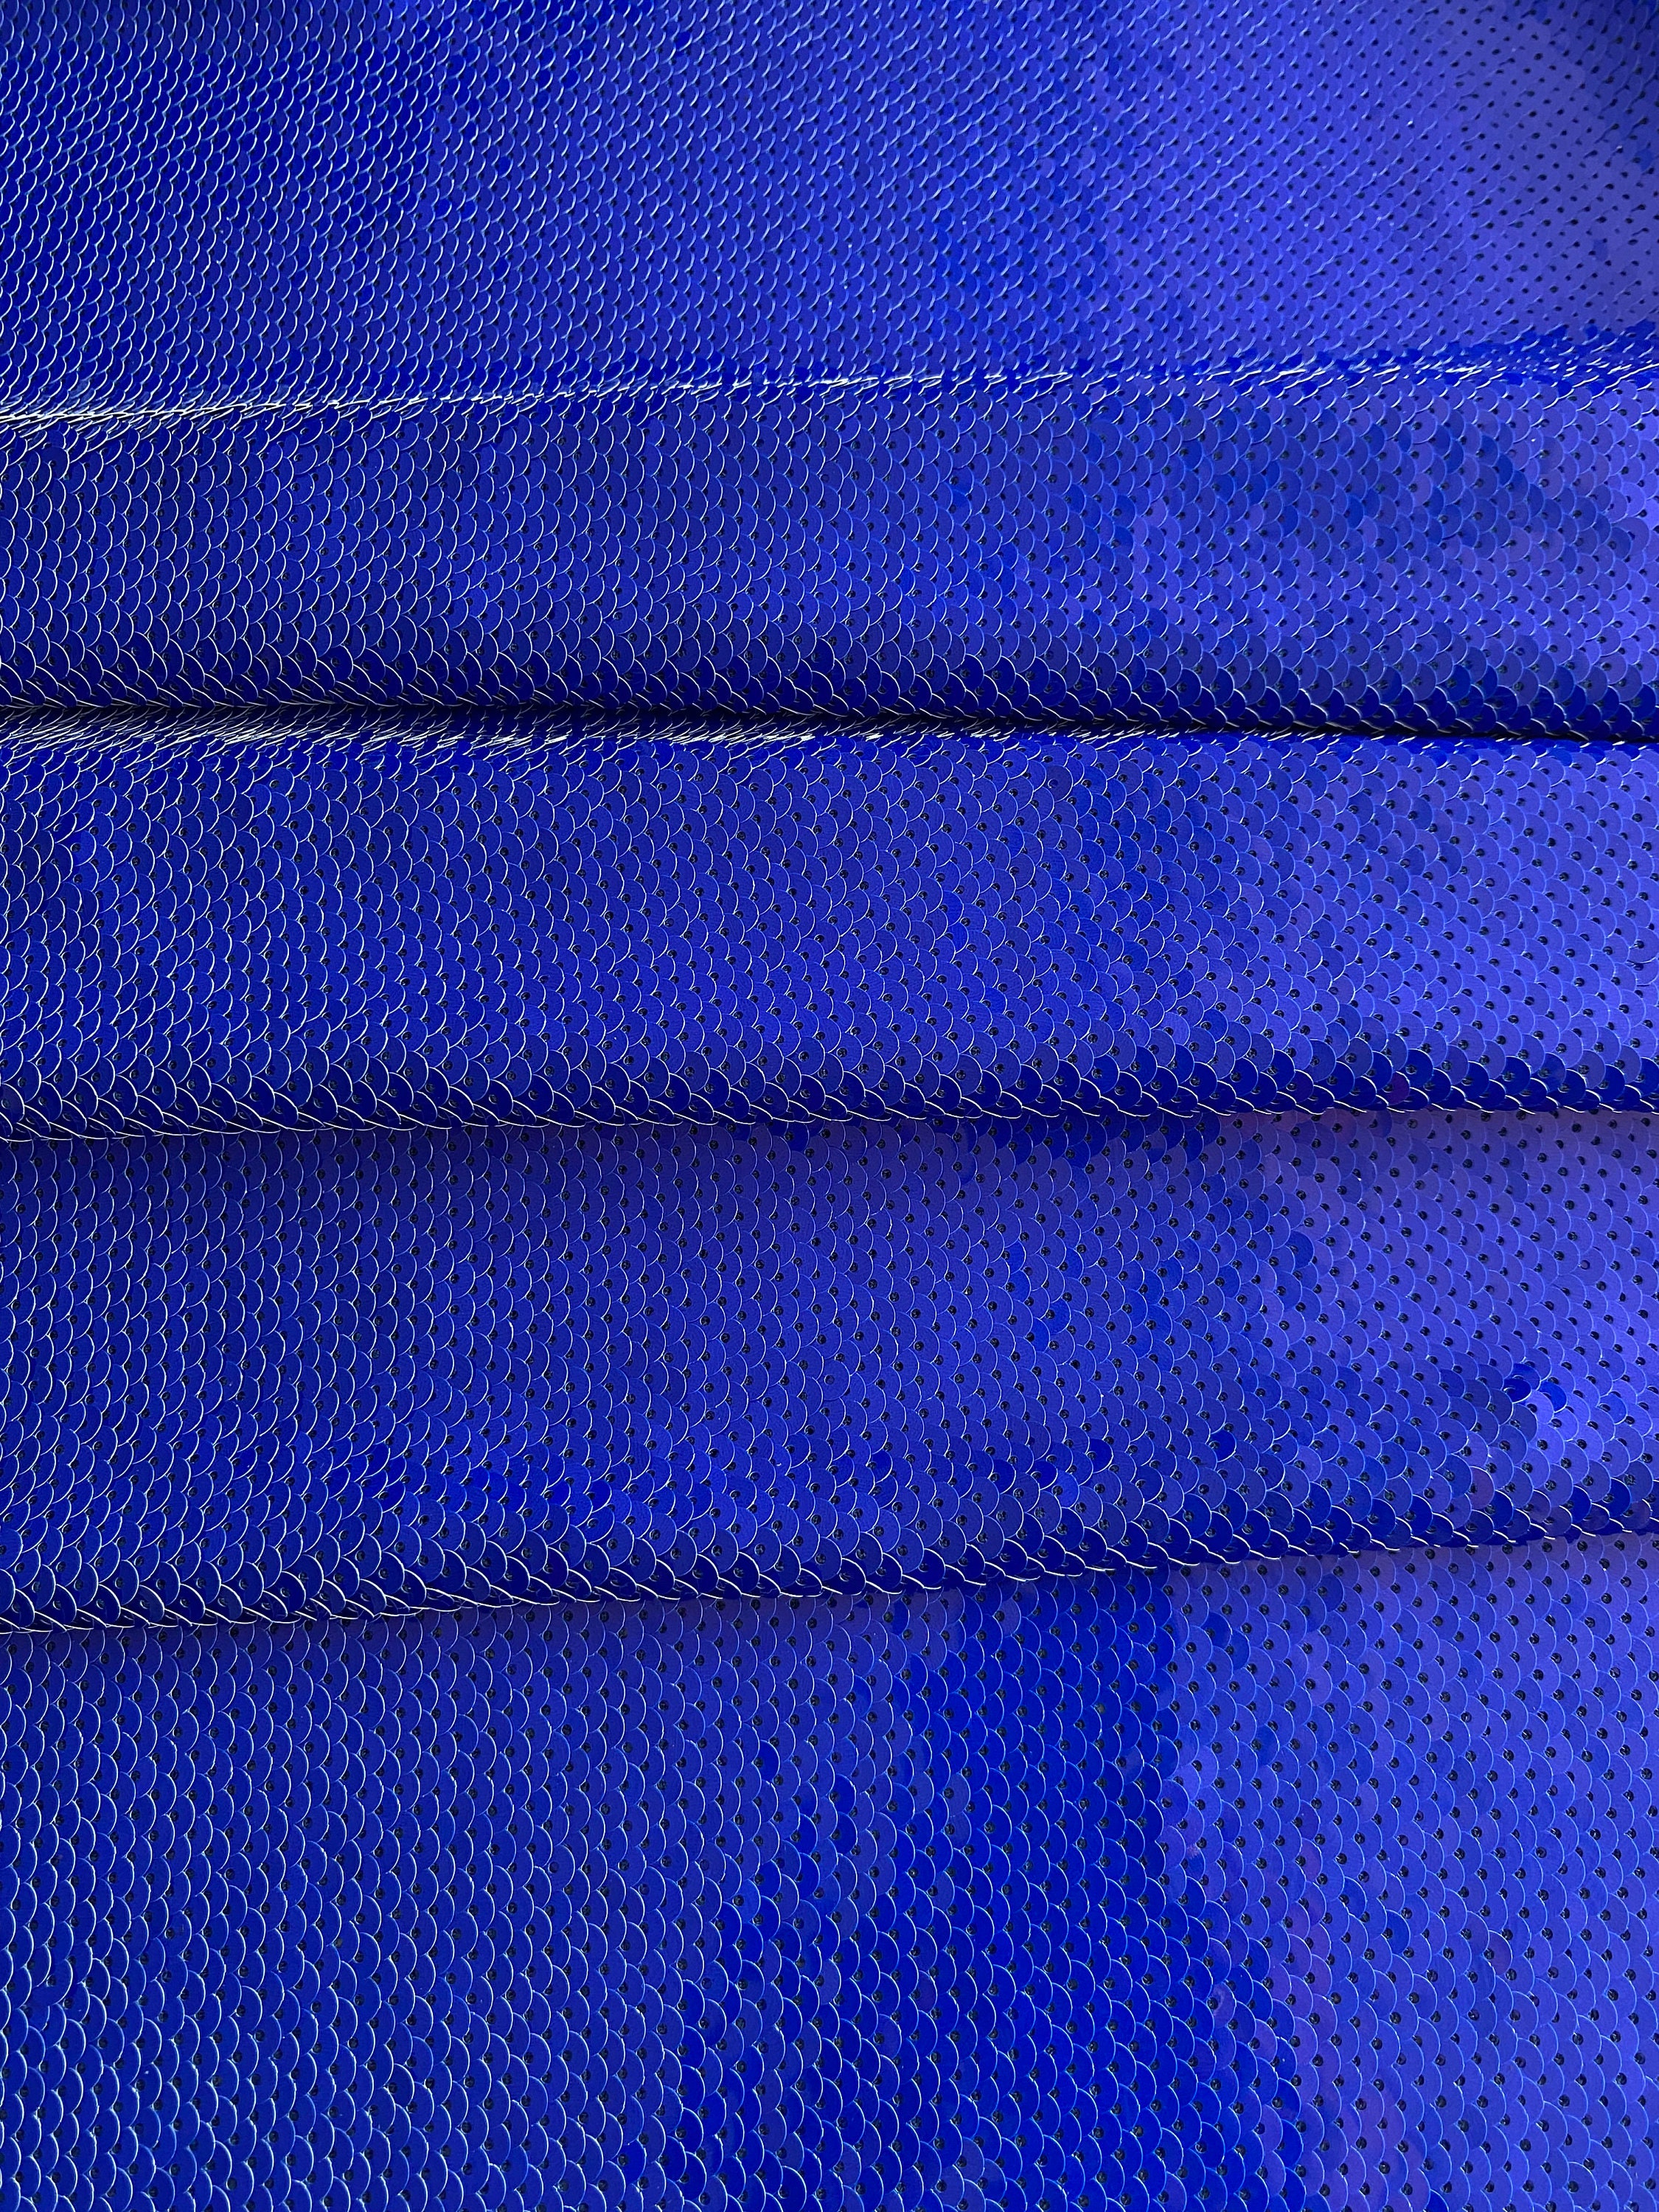 onlinestore buying Excl. Ready Sequin Fabric, Luxury Designer Excl. Italian  Italian Fabric, sequin Fabric, fabric, designer fabric, luxury fabric,  ready-to-wear fabric, premium quality, color: electric blue 